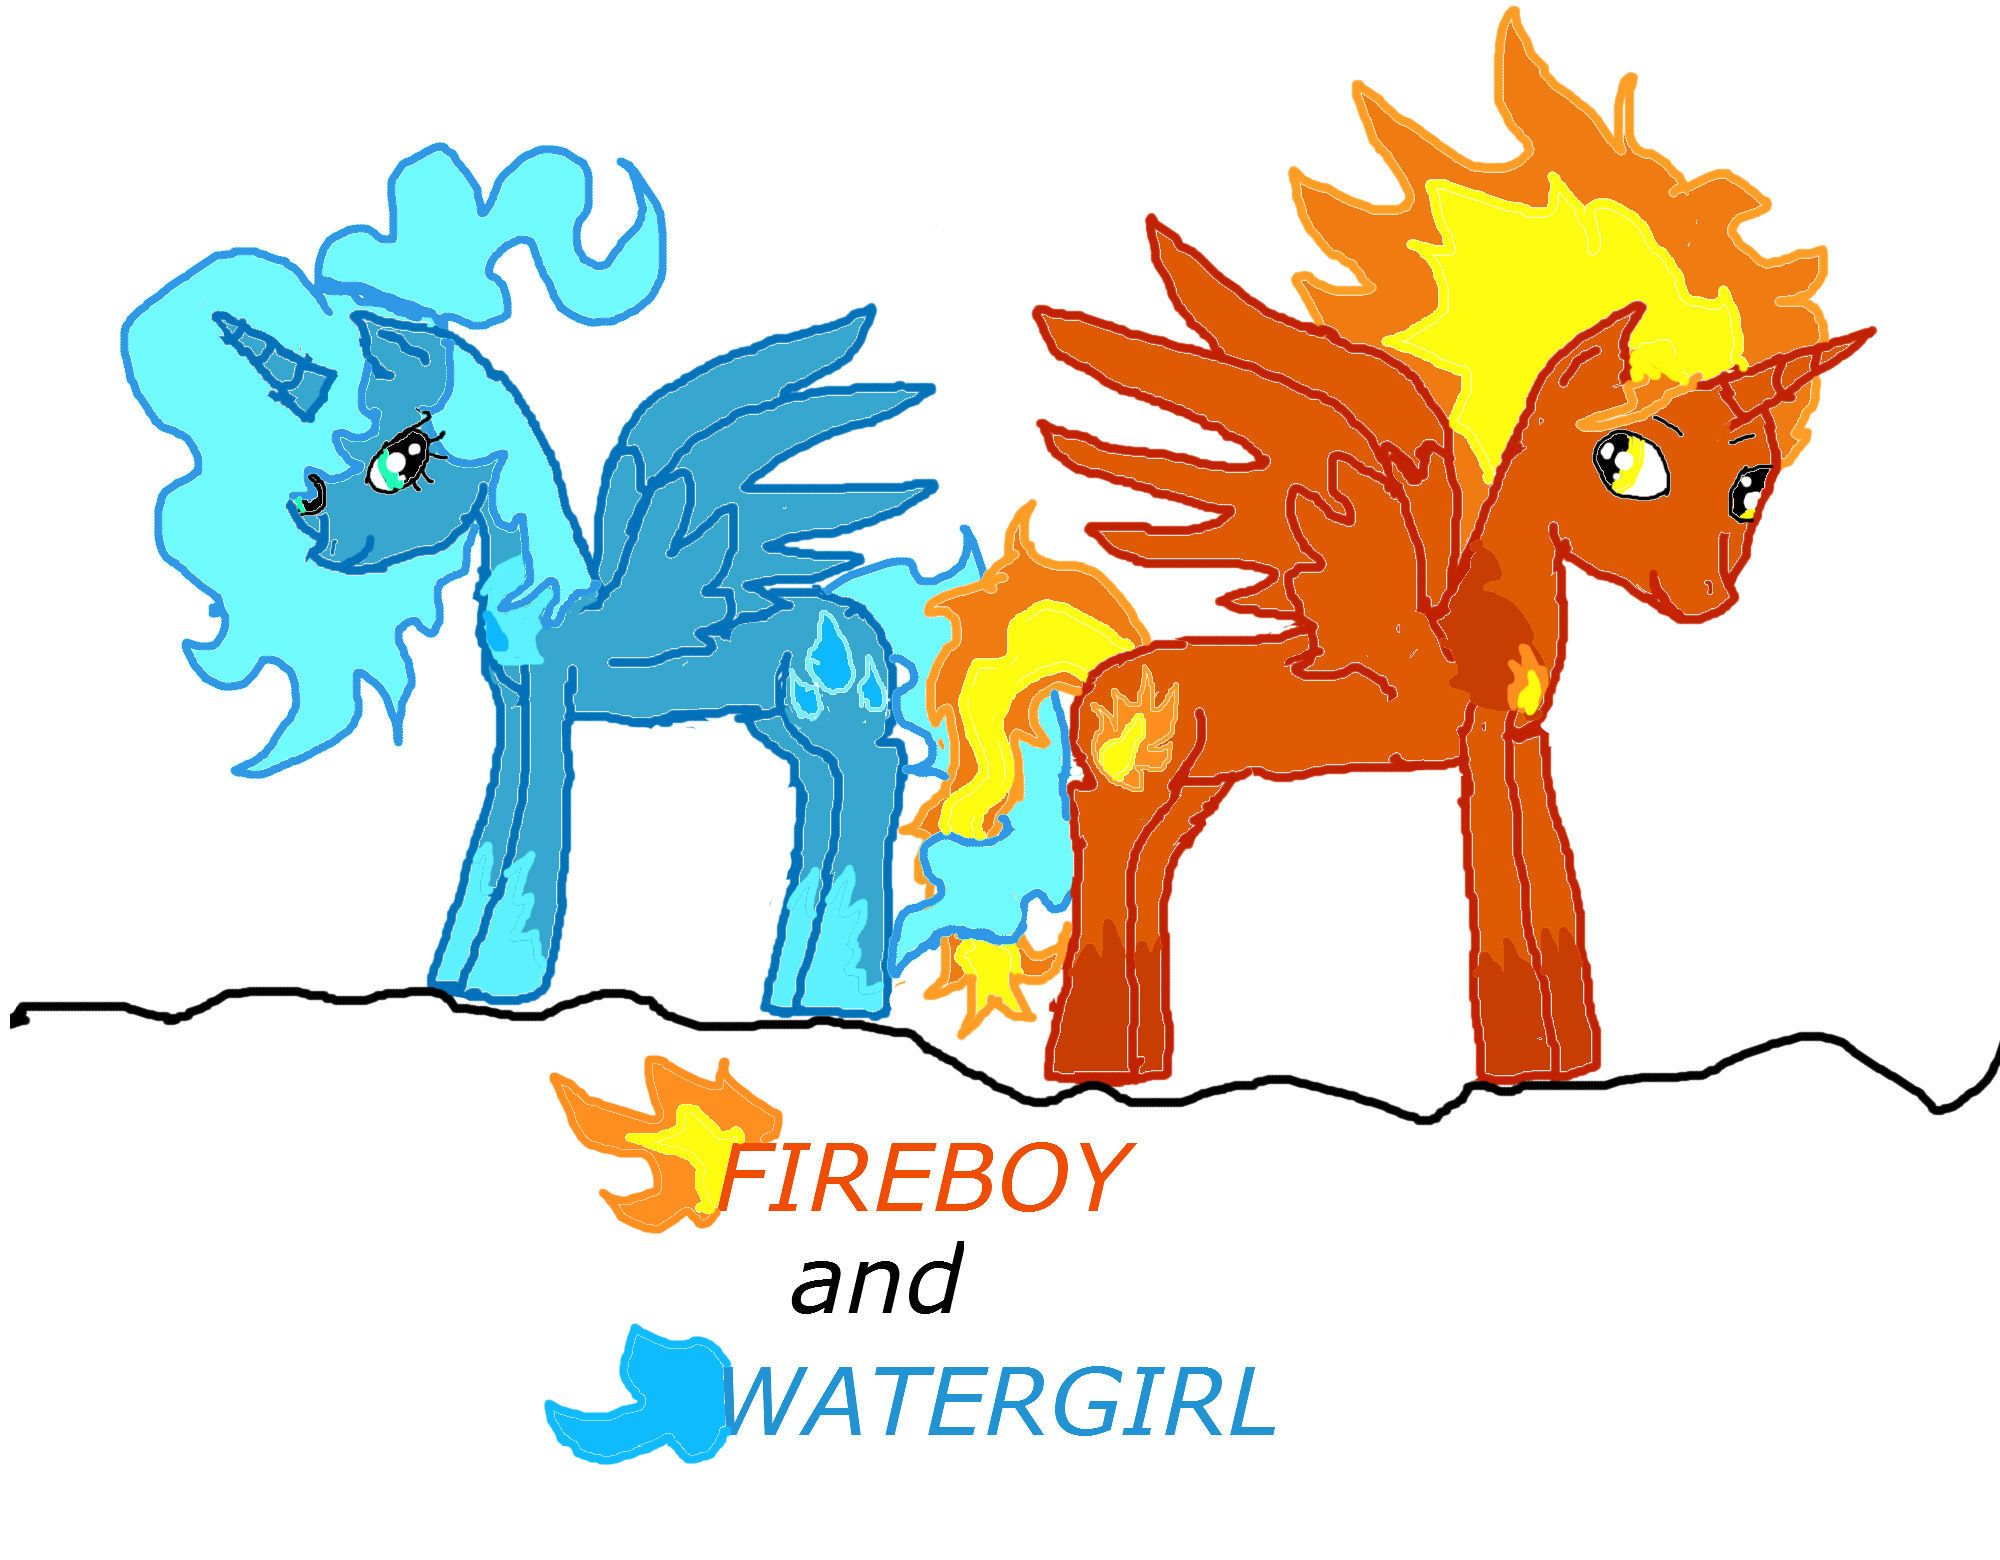 Fireboy and watergirl earthboy